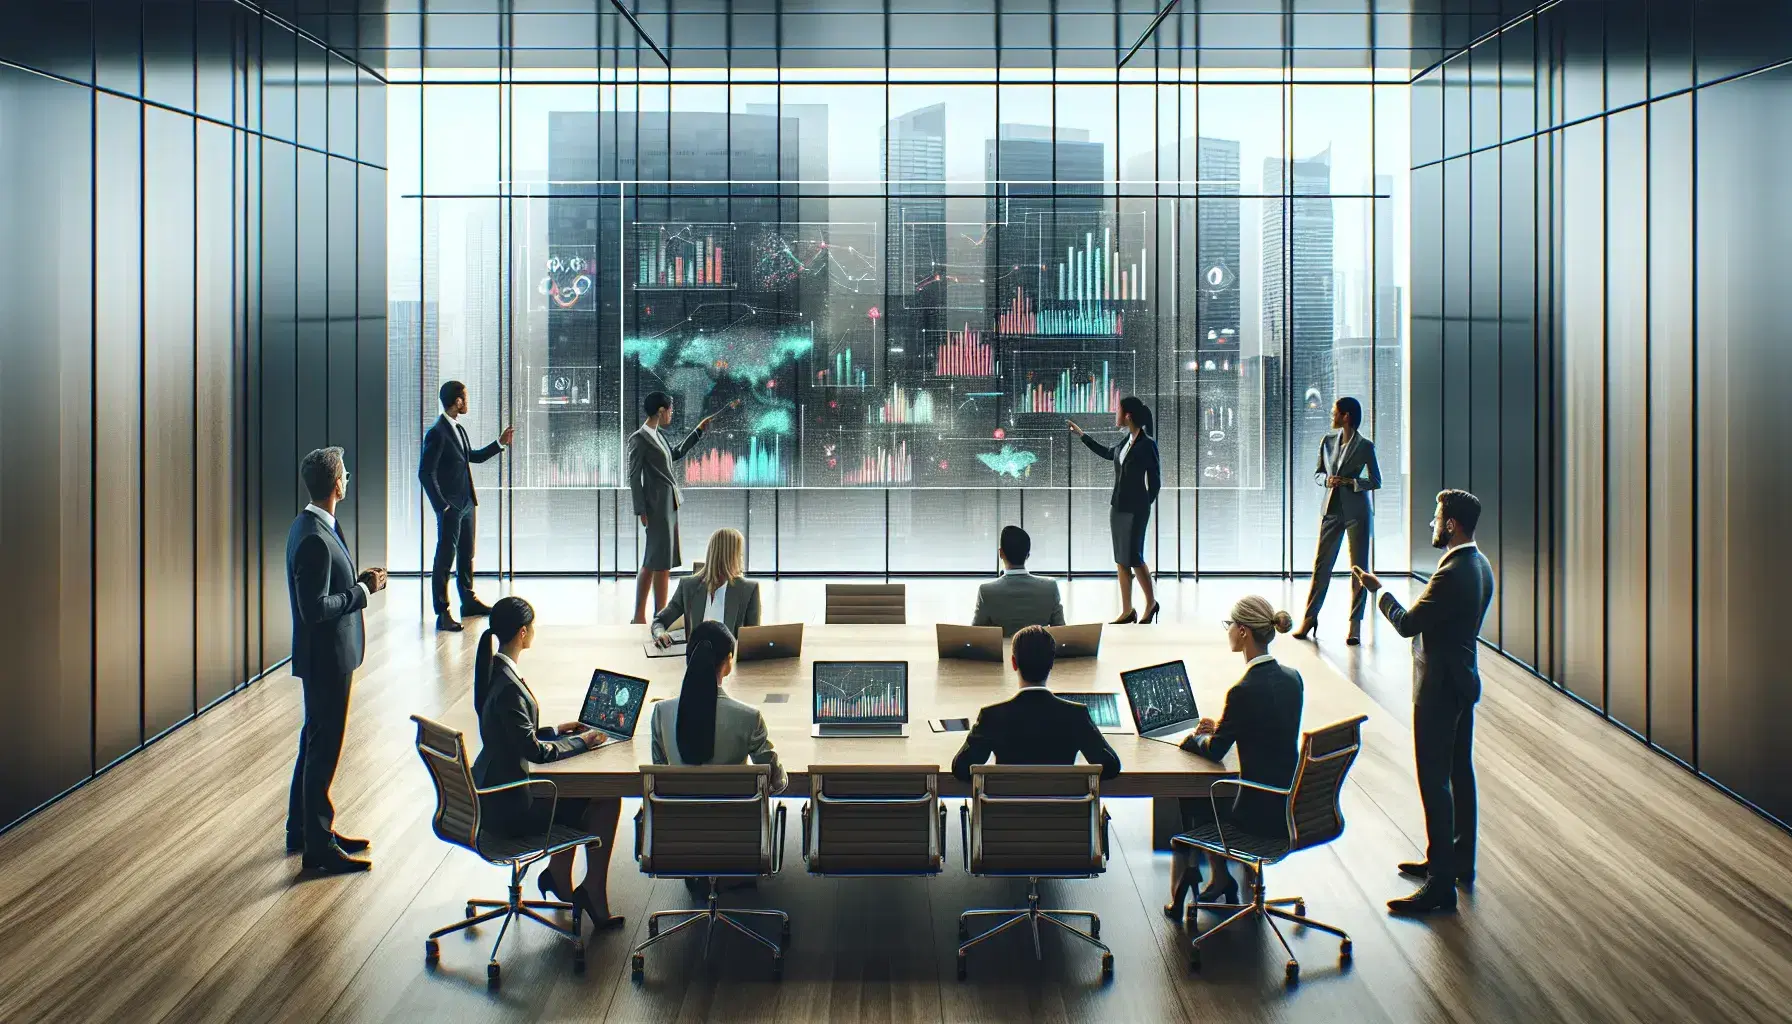 Professionals collaborate around a modern desk with tablets and smartphones displaying colorful data charts in a bright office with a city view.